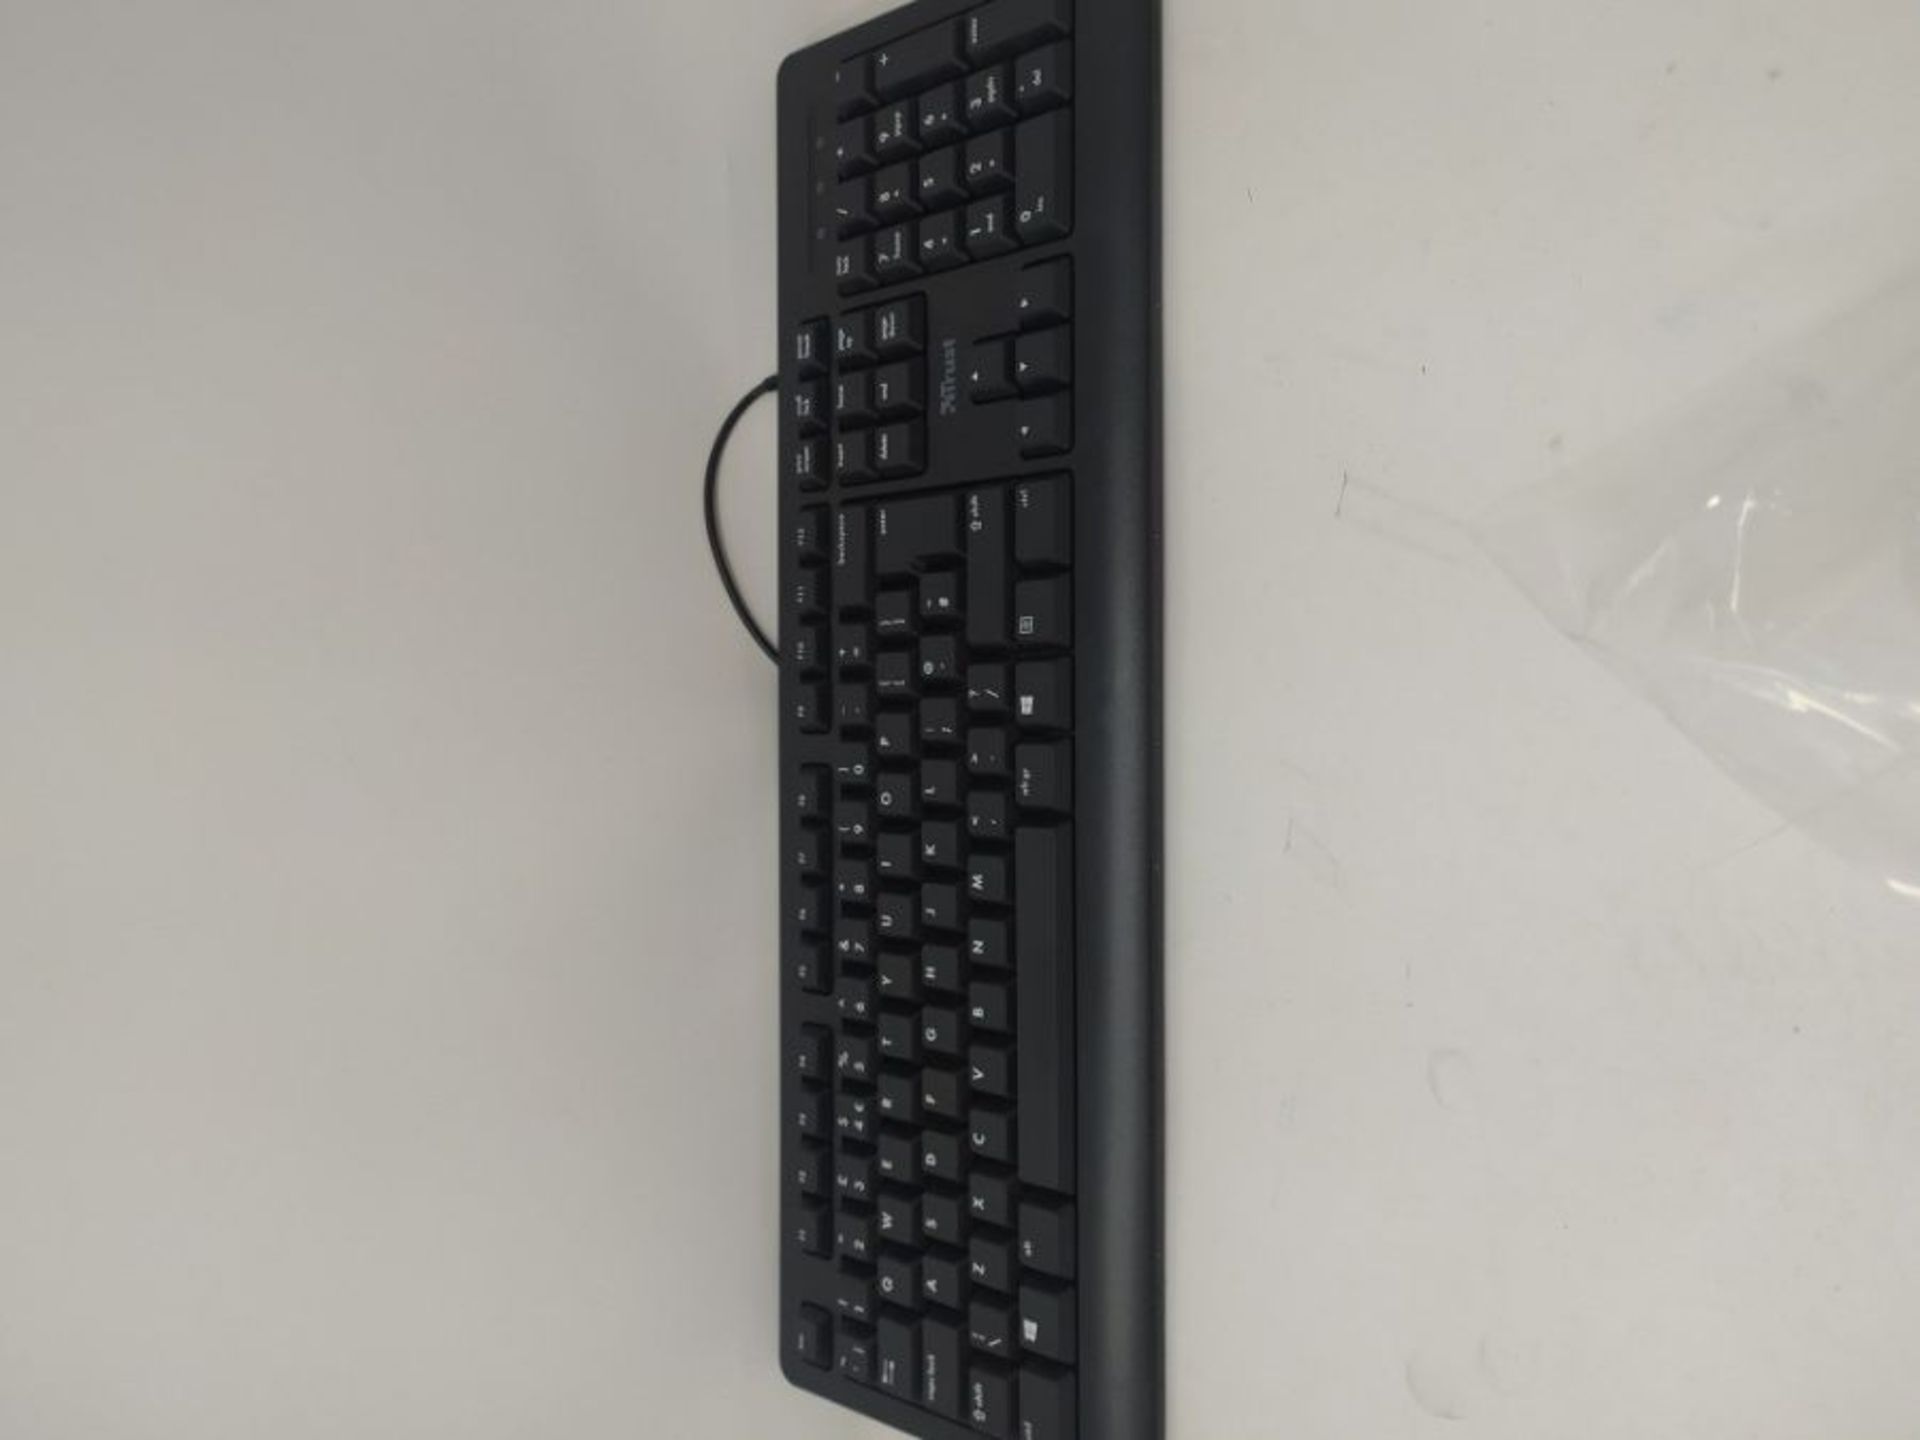 Trust Taro Wired Keyboard and Mouse Set - Qwerty UK Layout, Full-Size Keyboard, Spill- - Image 2 of 2